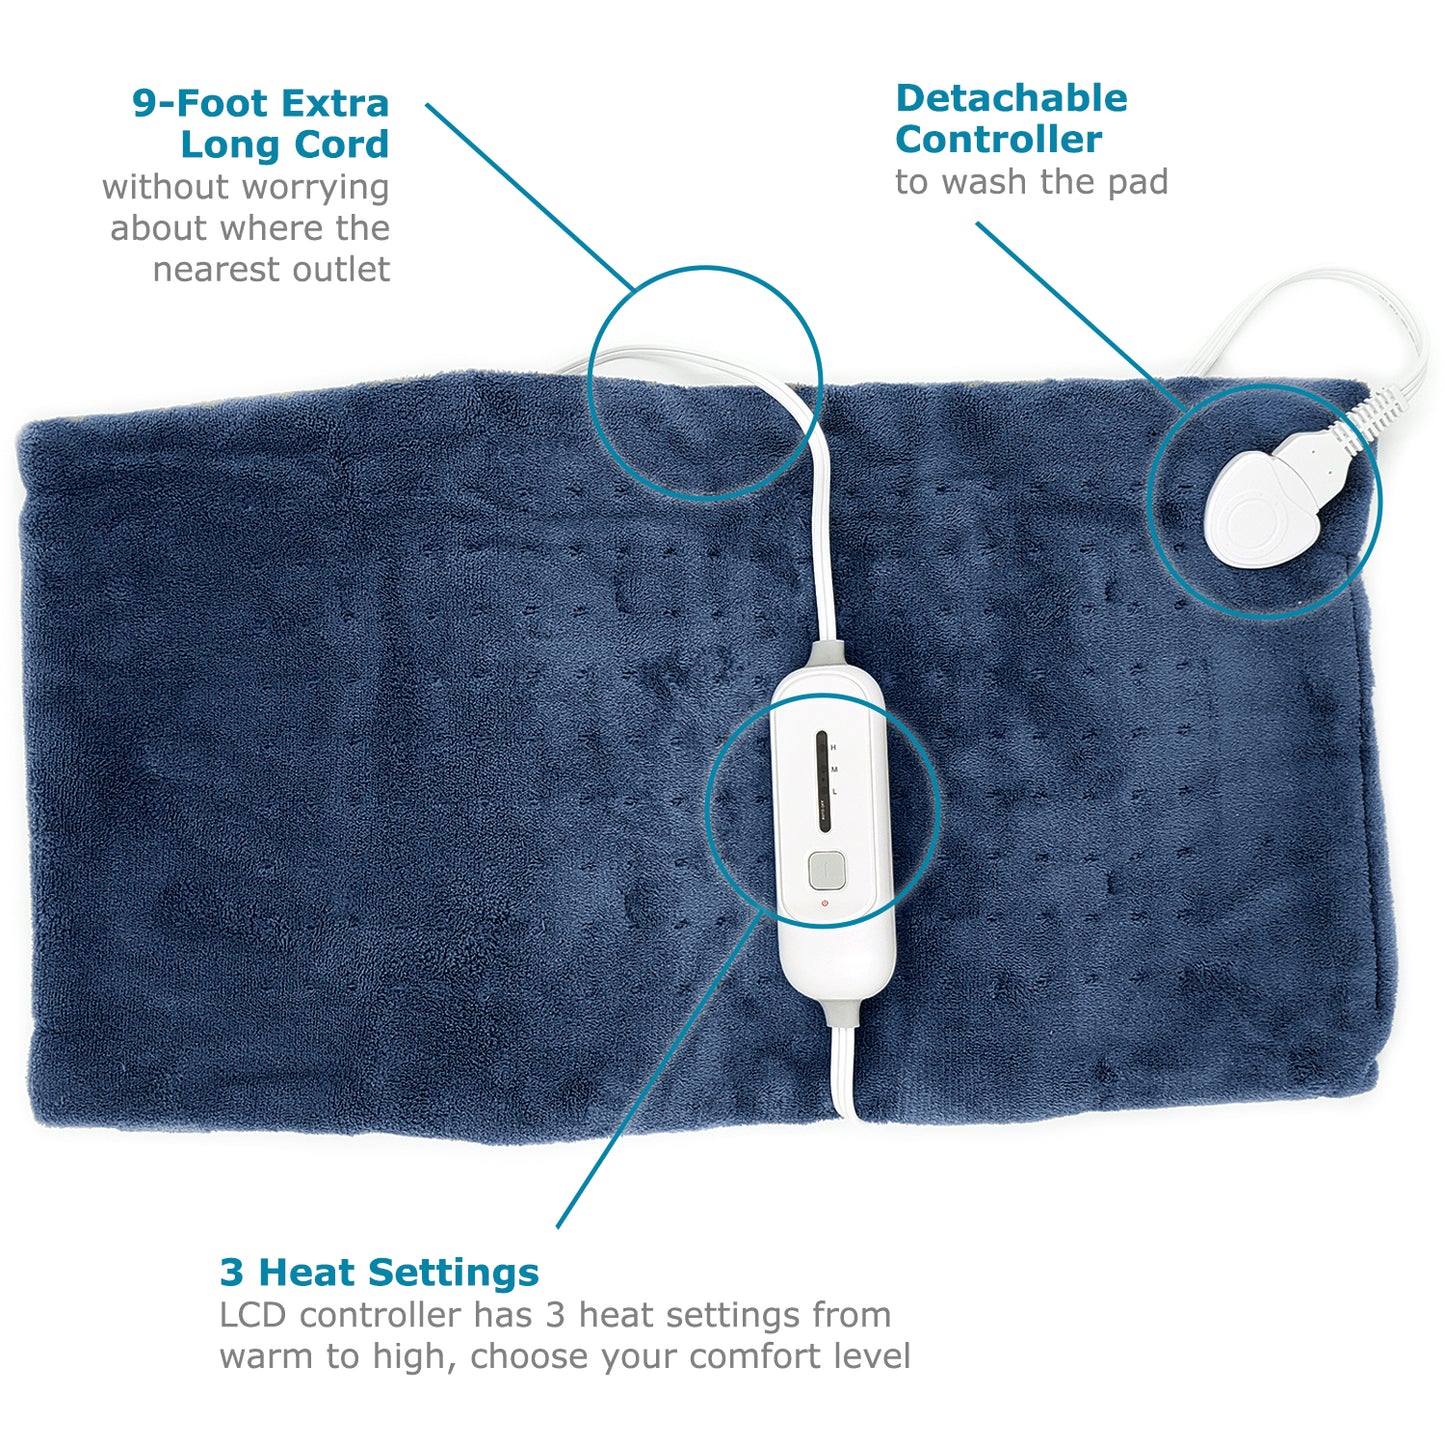 Dr Relief by SUNAID Full Back Heating Pad Fast Heating Wrap with Auto Shut Off for Back, Neck and Shoulder, Abdomen, Waist Pain Relief, Dry/Moist Option (12"x24", Navy)